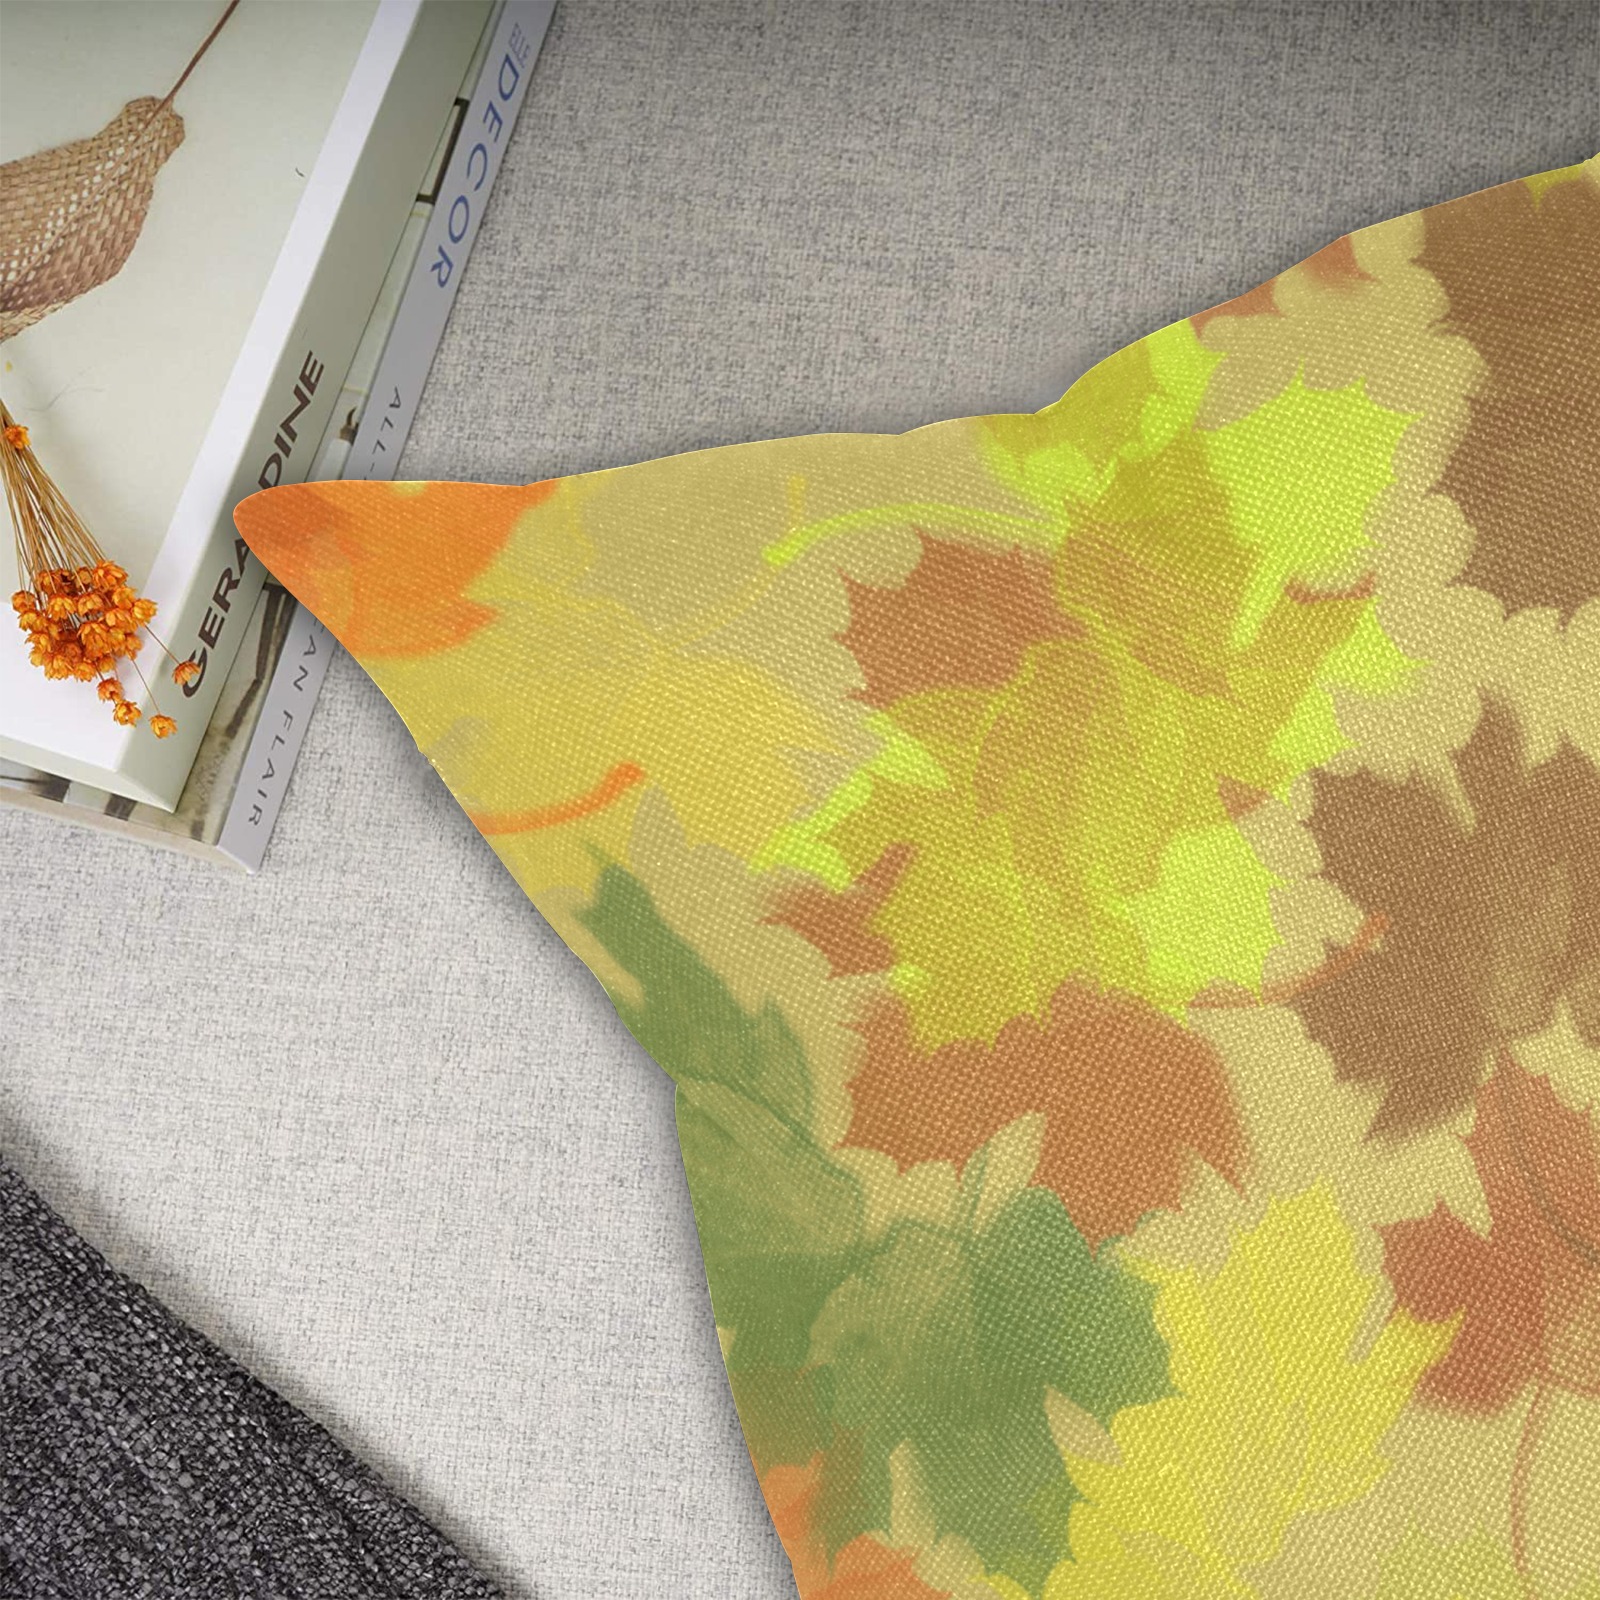 Autumn Leaves / Fall Leaves Linen Zippered Pillowcase 18"x18"(Two Sides&Pack of 2)